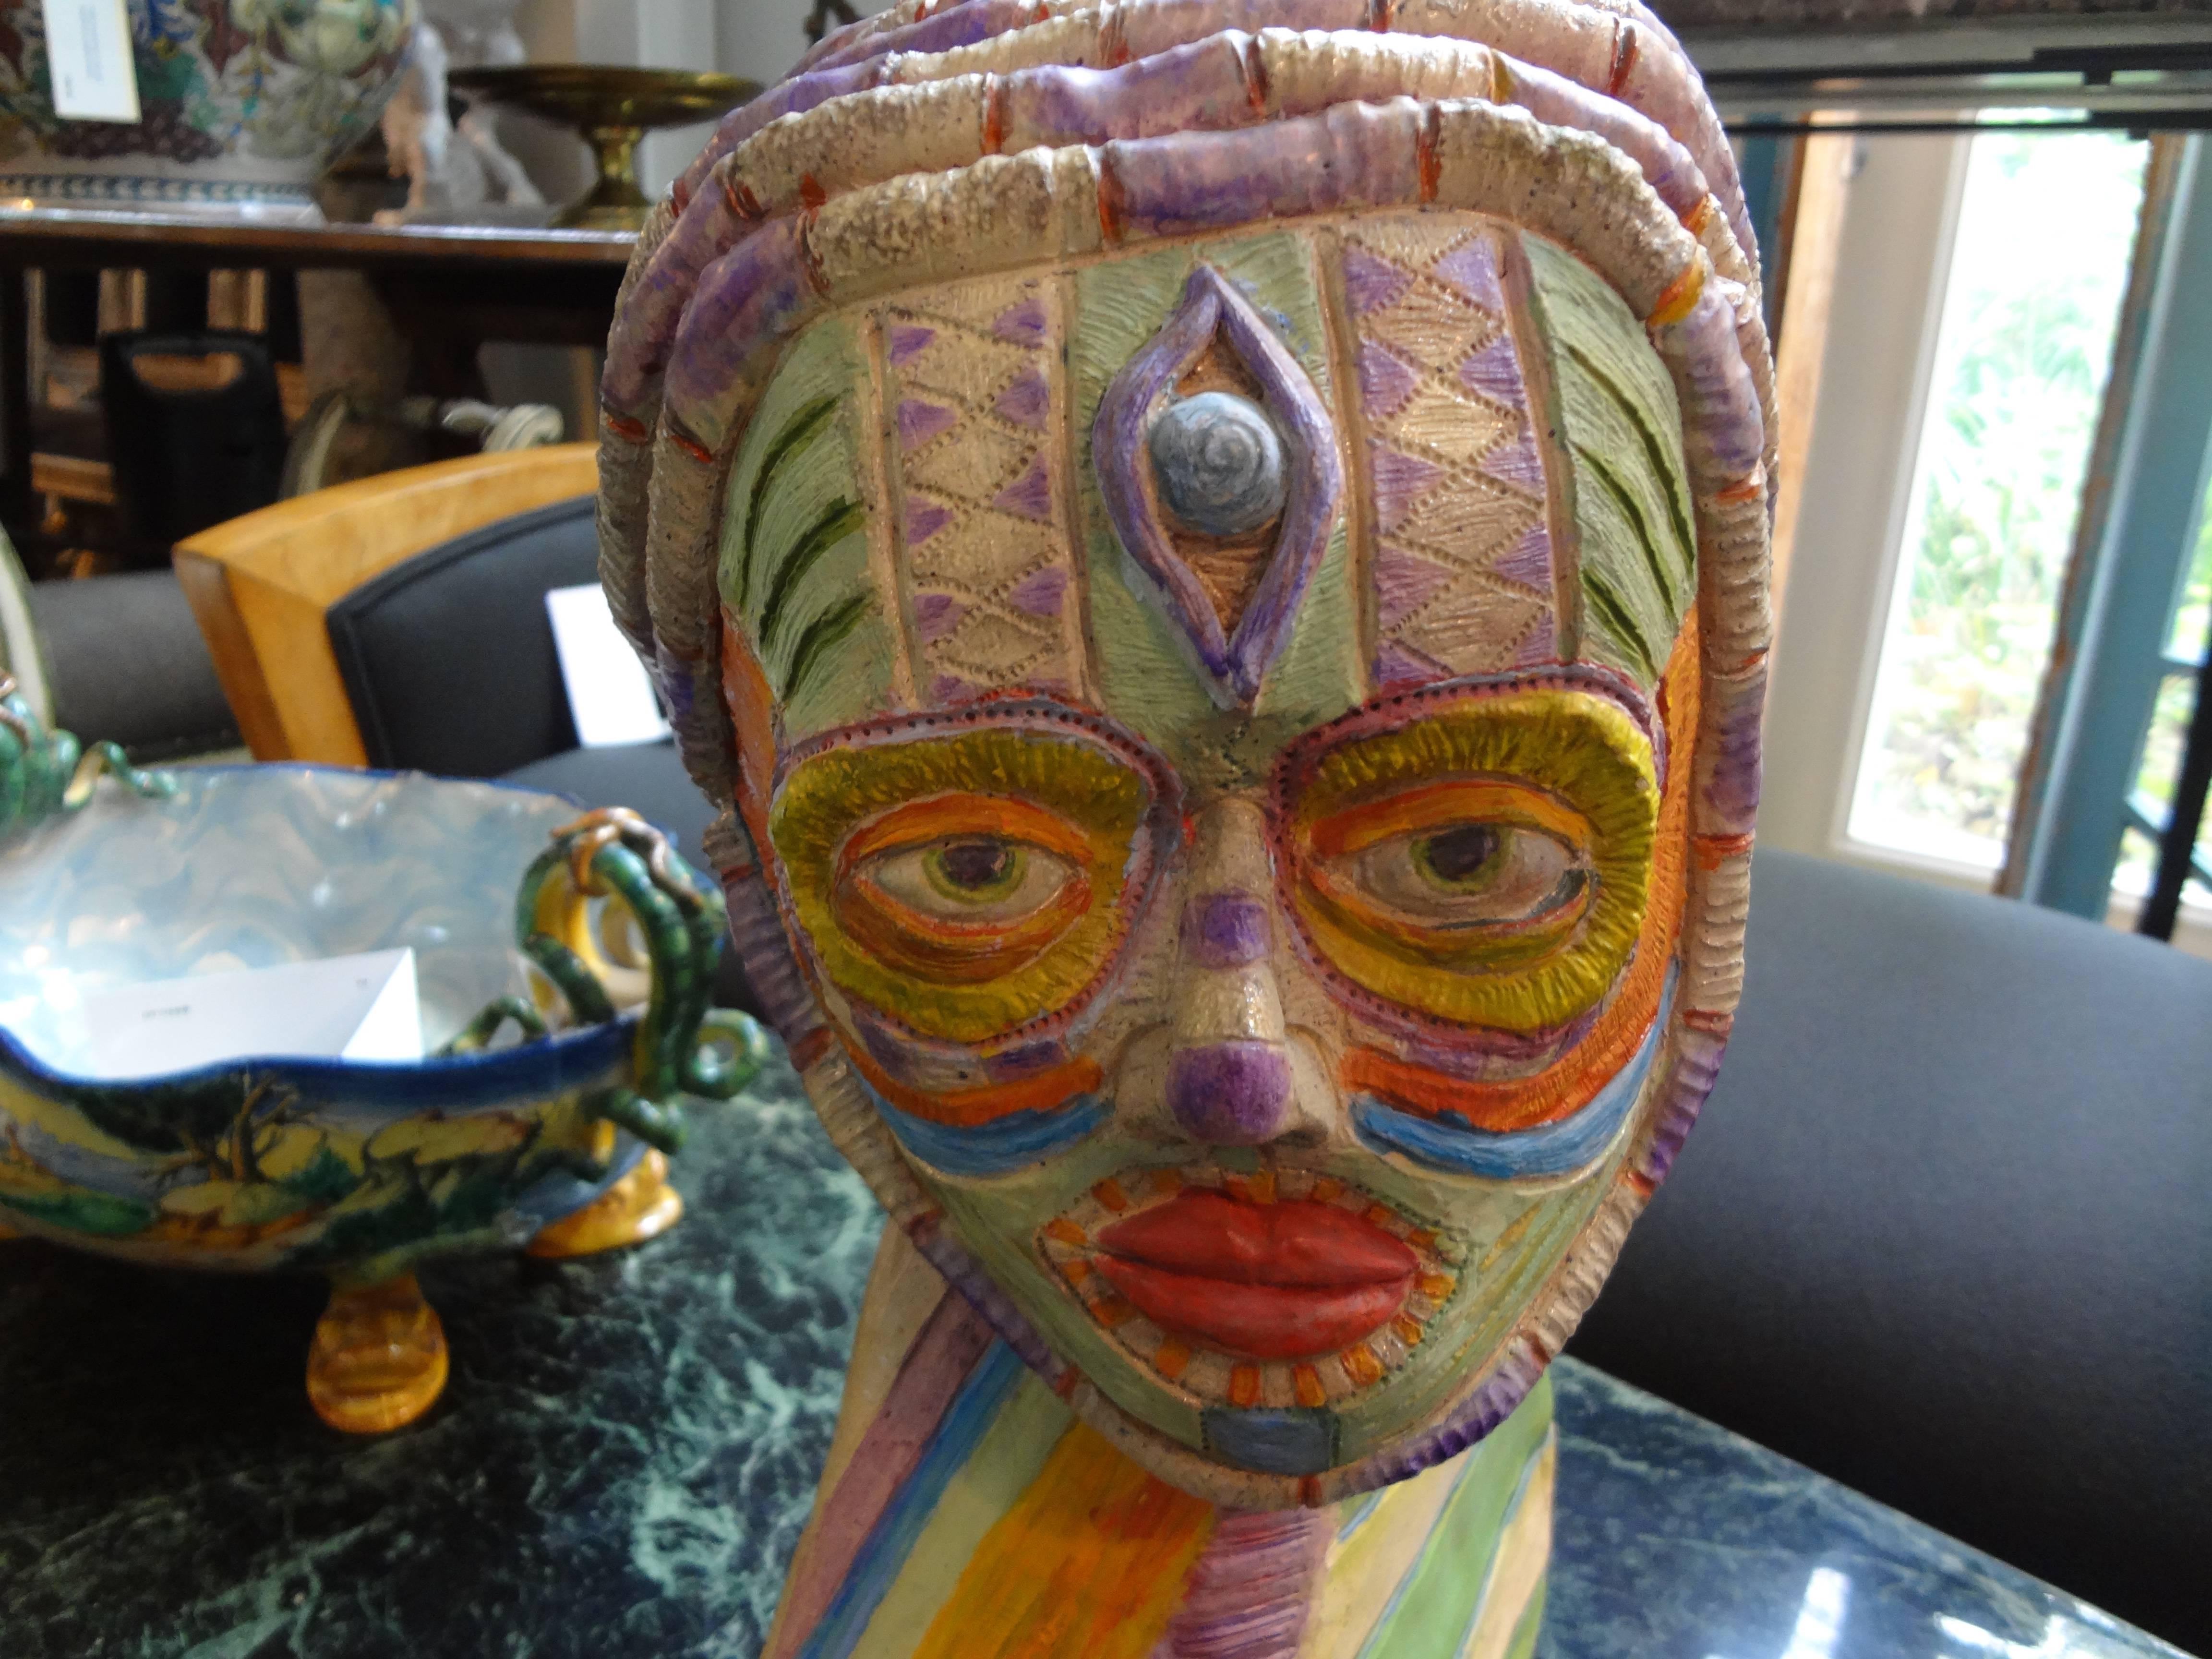 Tribal style clay bust sculpture, 20th century.
Unusual tribal style / African style artist clay bust from the 20th century. This unique colorful artist sculpture depicts a tribal figure.